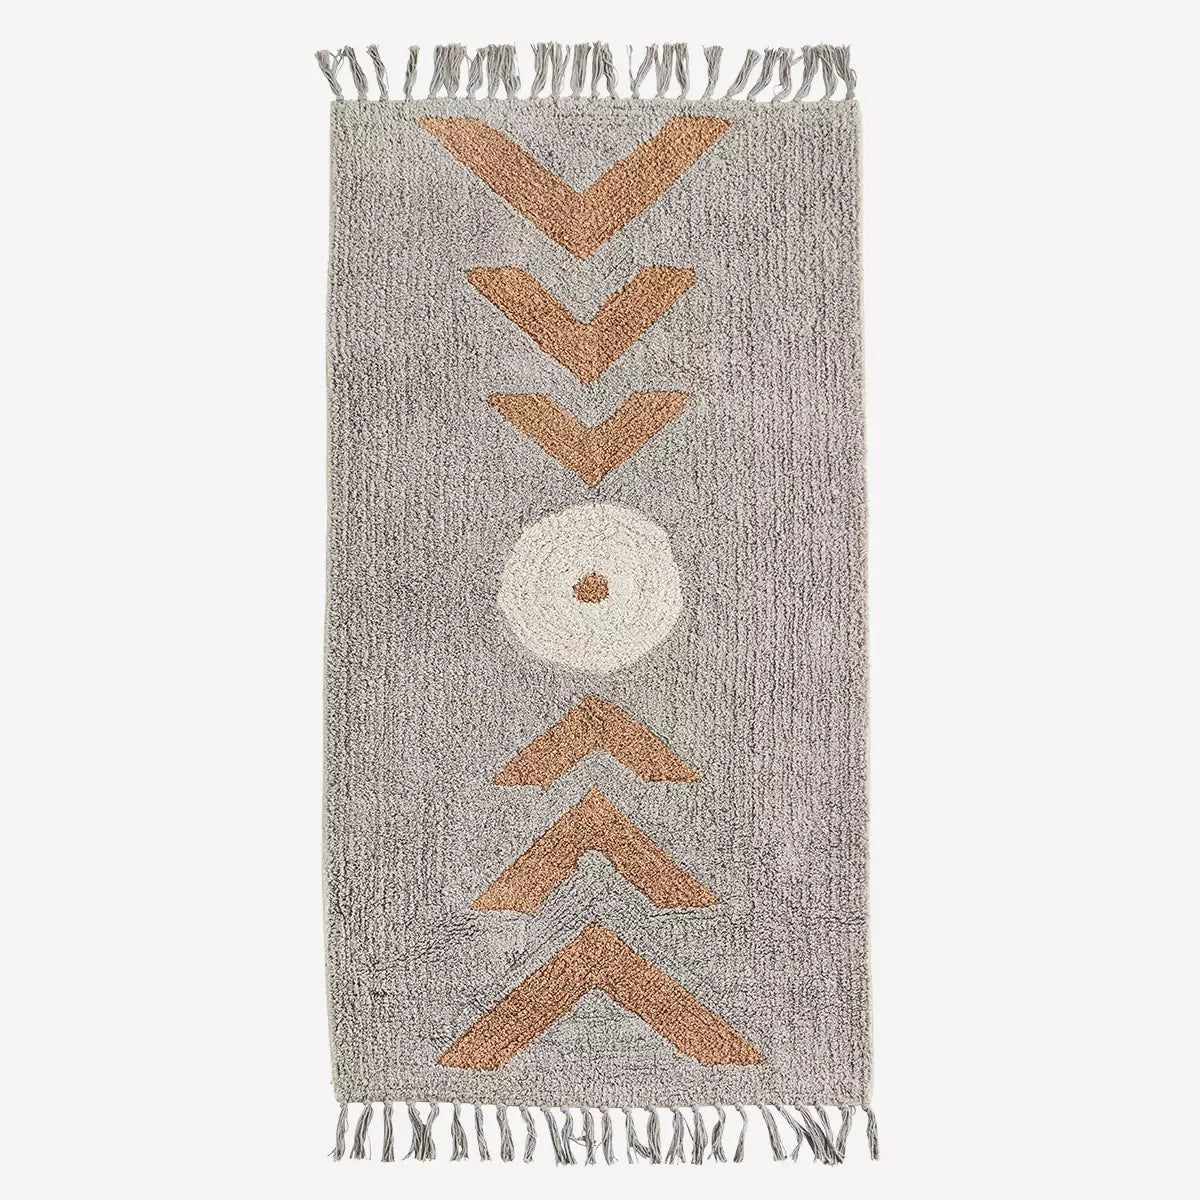 Tufted Cotton Runner With Tassels Grey, Ivory, Caramel